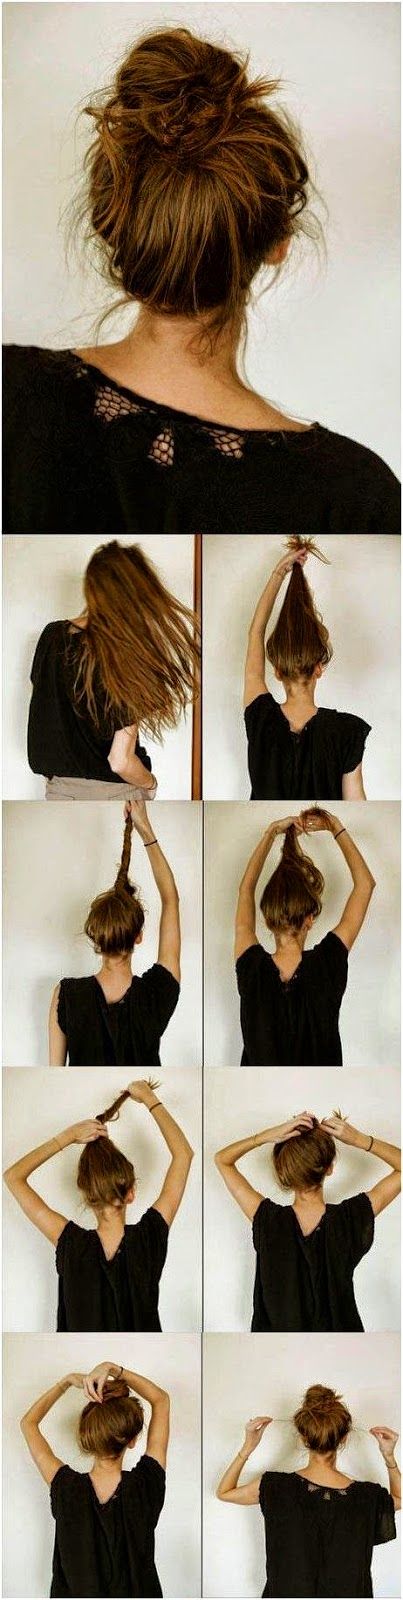 Step by Step Hair Tutorials for School